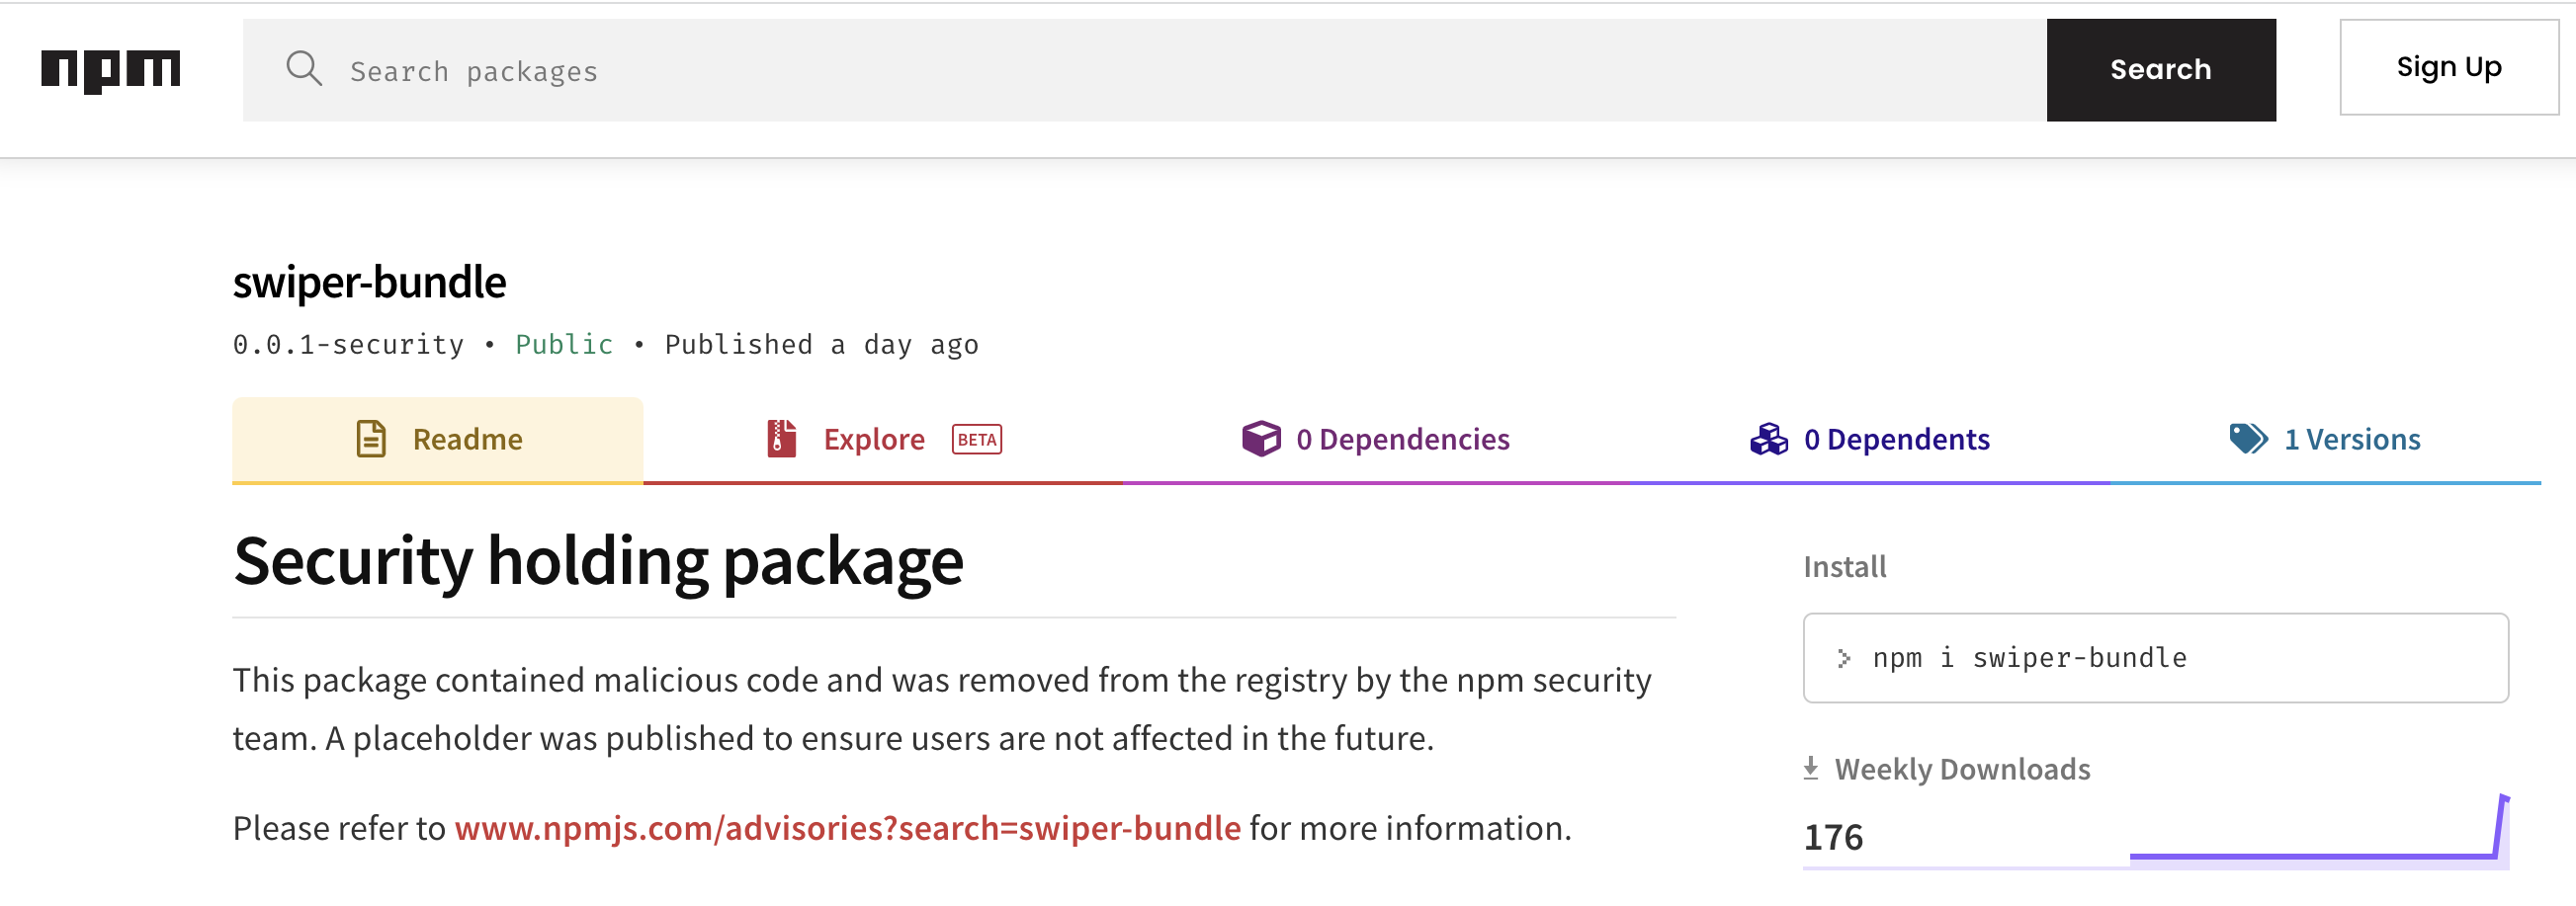 Image showing message on package removal from npm.